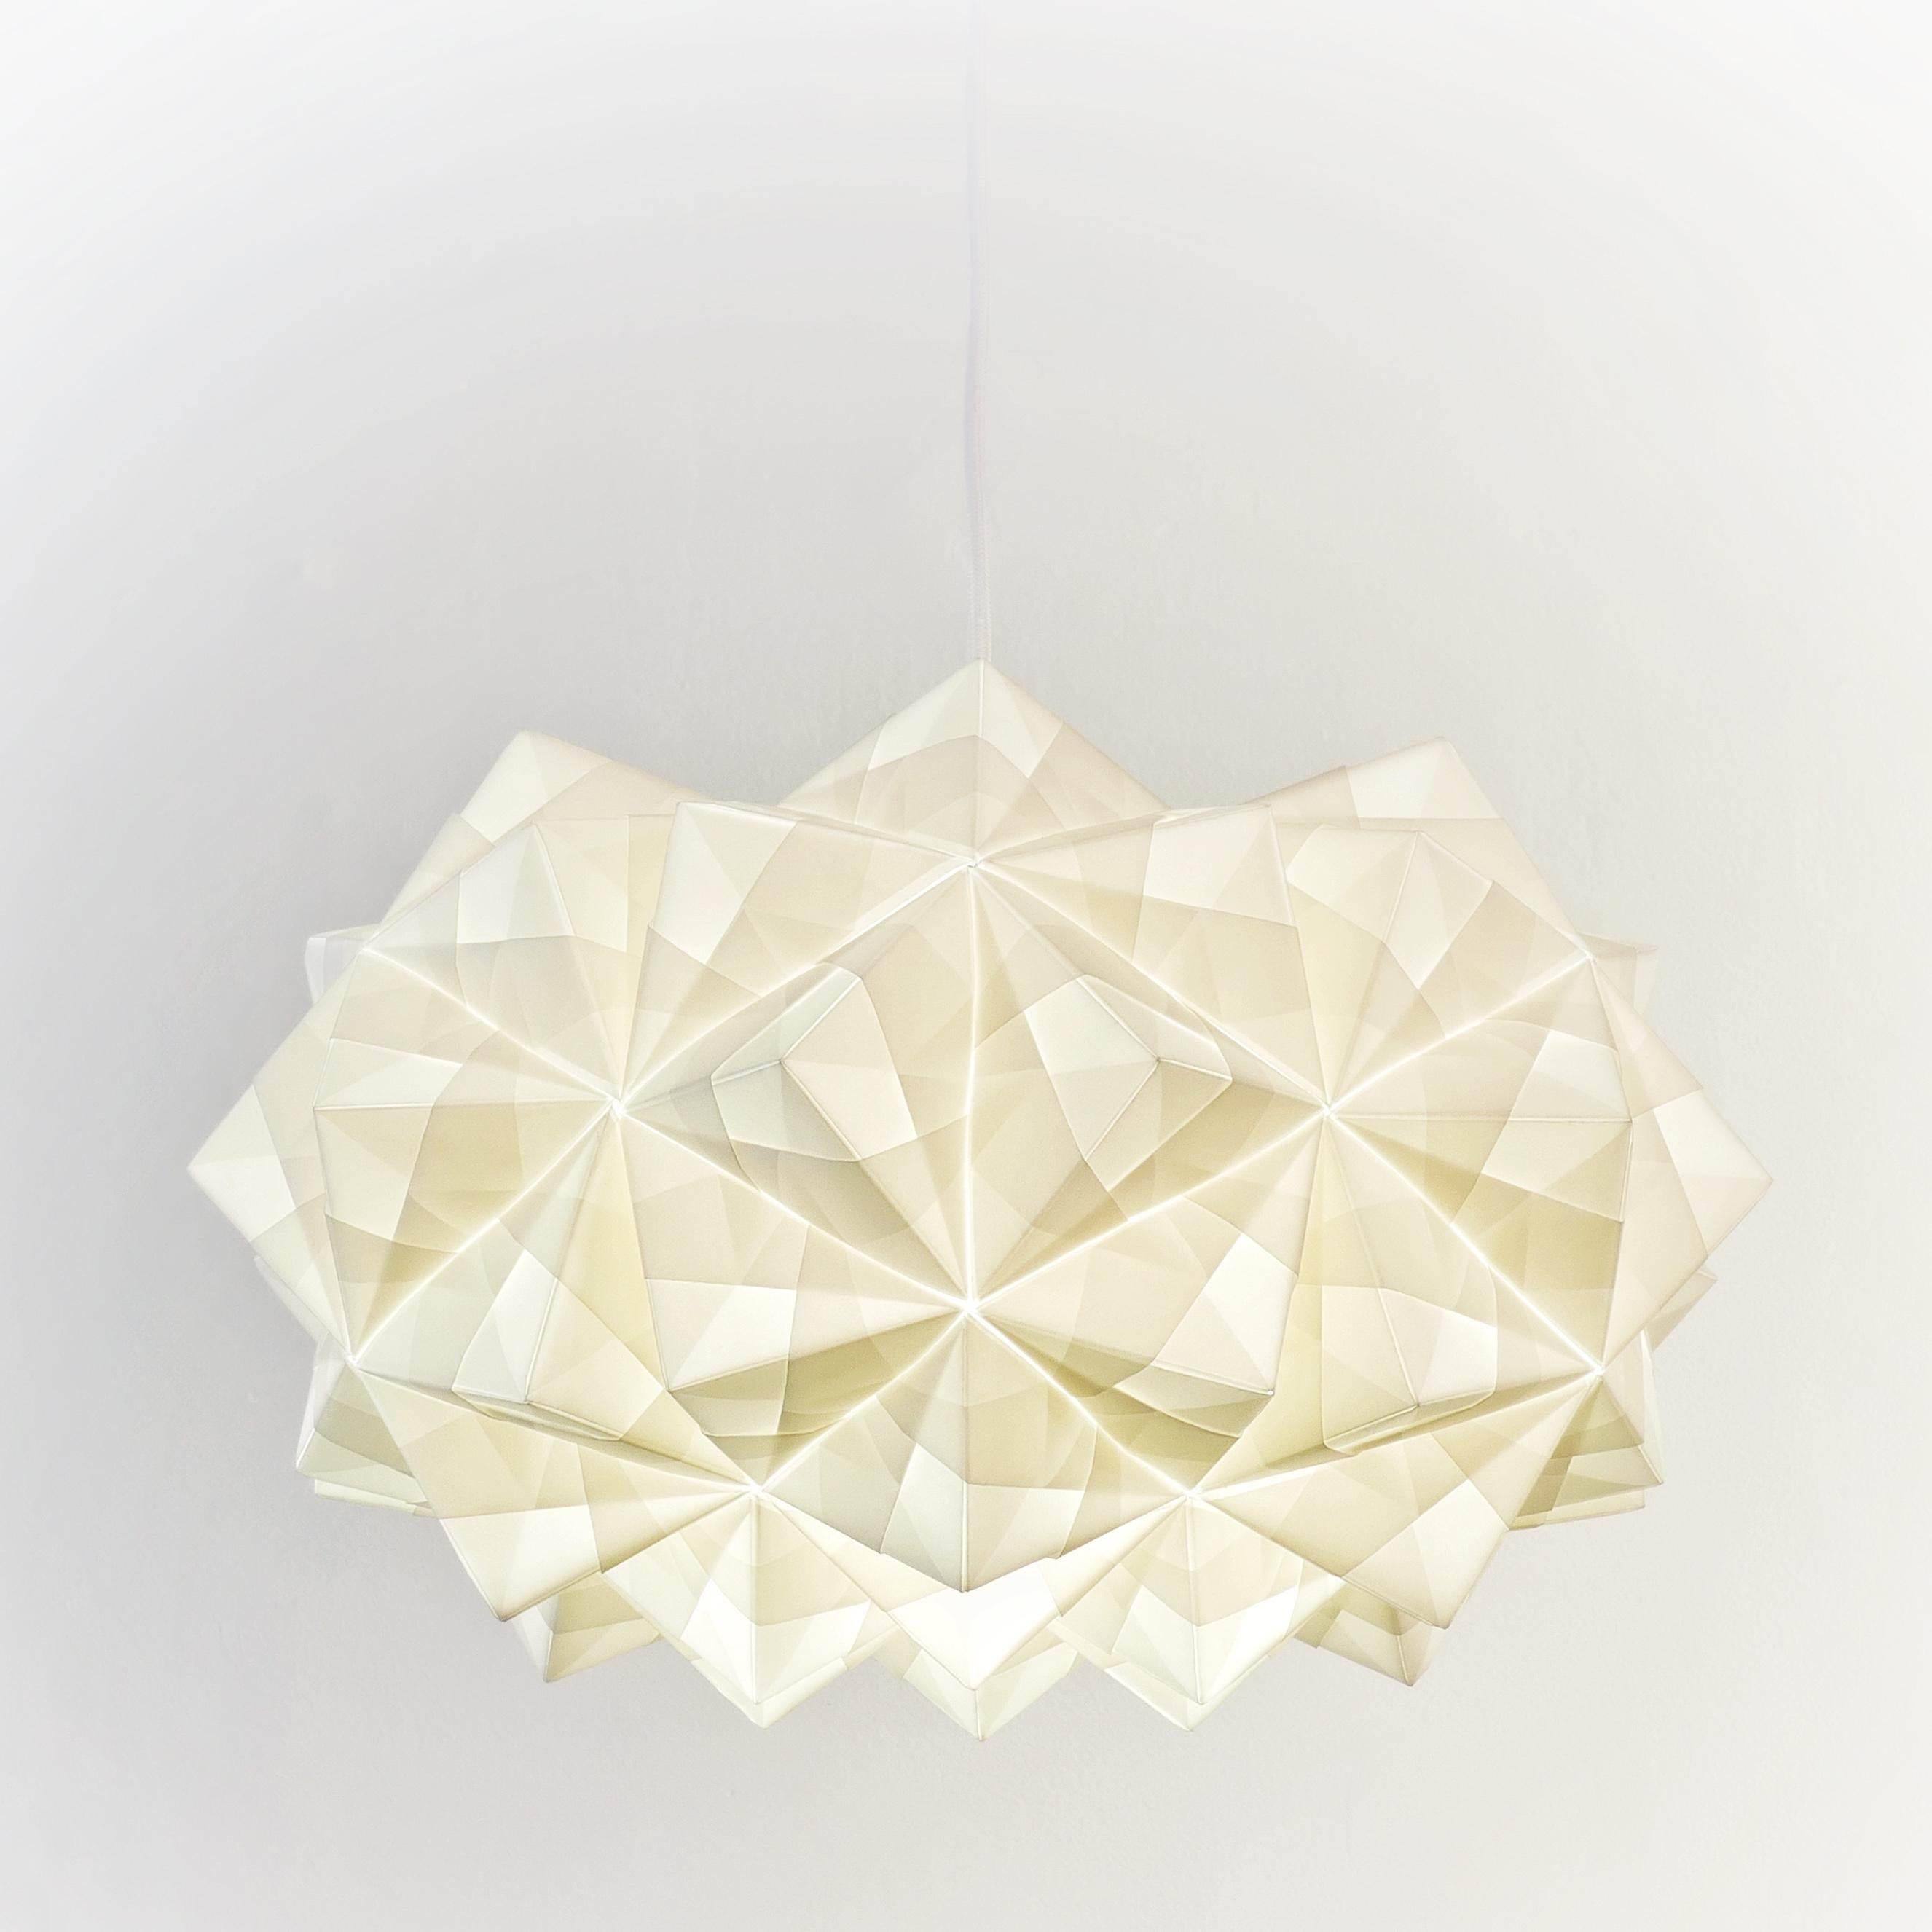 Elegant and at the same time soft and indirect light for a unique and personal home.  This Japanese style white paper pendant lighting called Siphonia is hand-folded from almost 70 sheets of paper. The Siphonia lamp is designed and artisanally